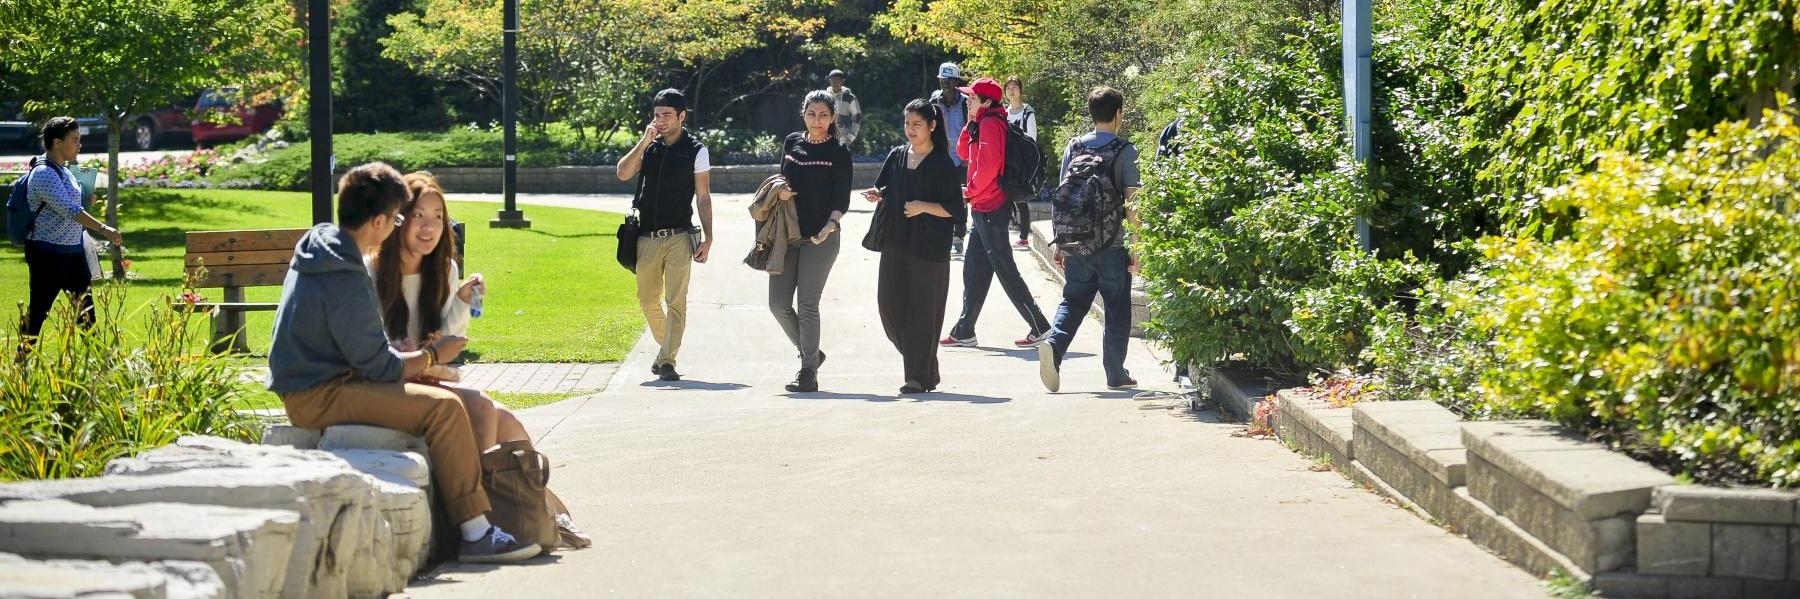 Students on campus